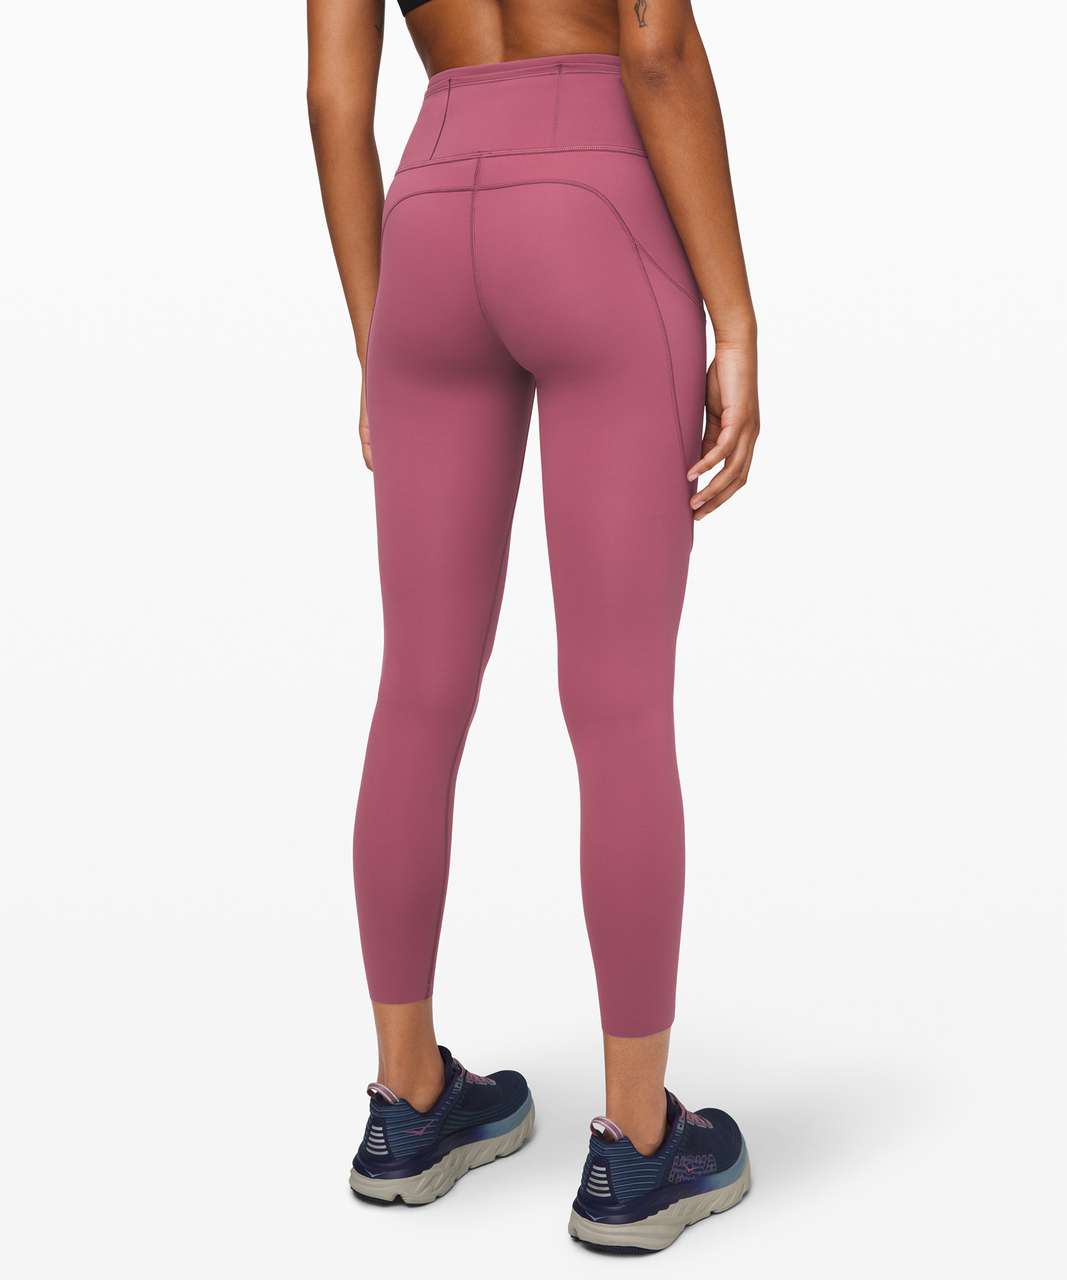 Lululemon Fast and Free Tight II 25" *Non-Reflective Nulux - Plumful